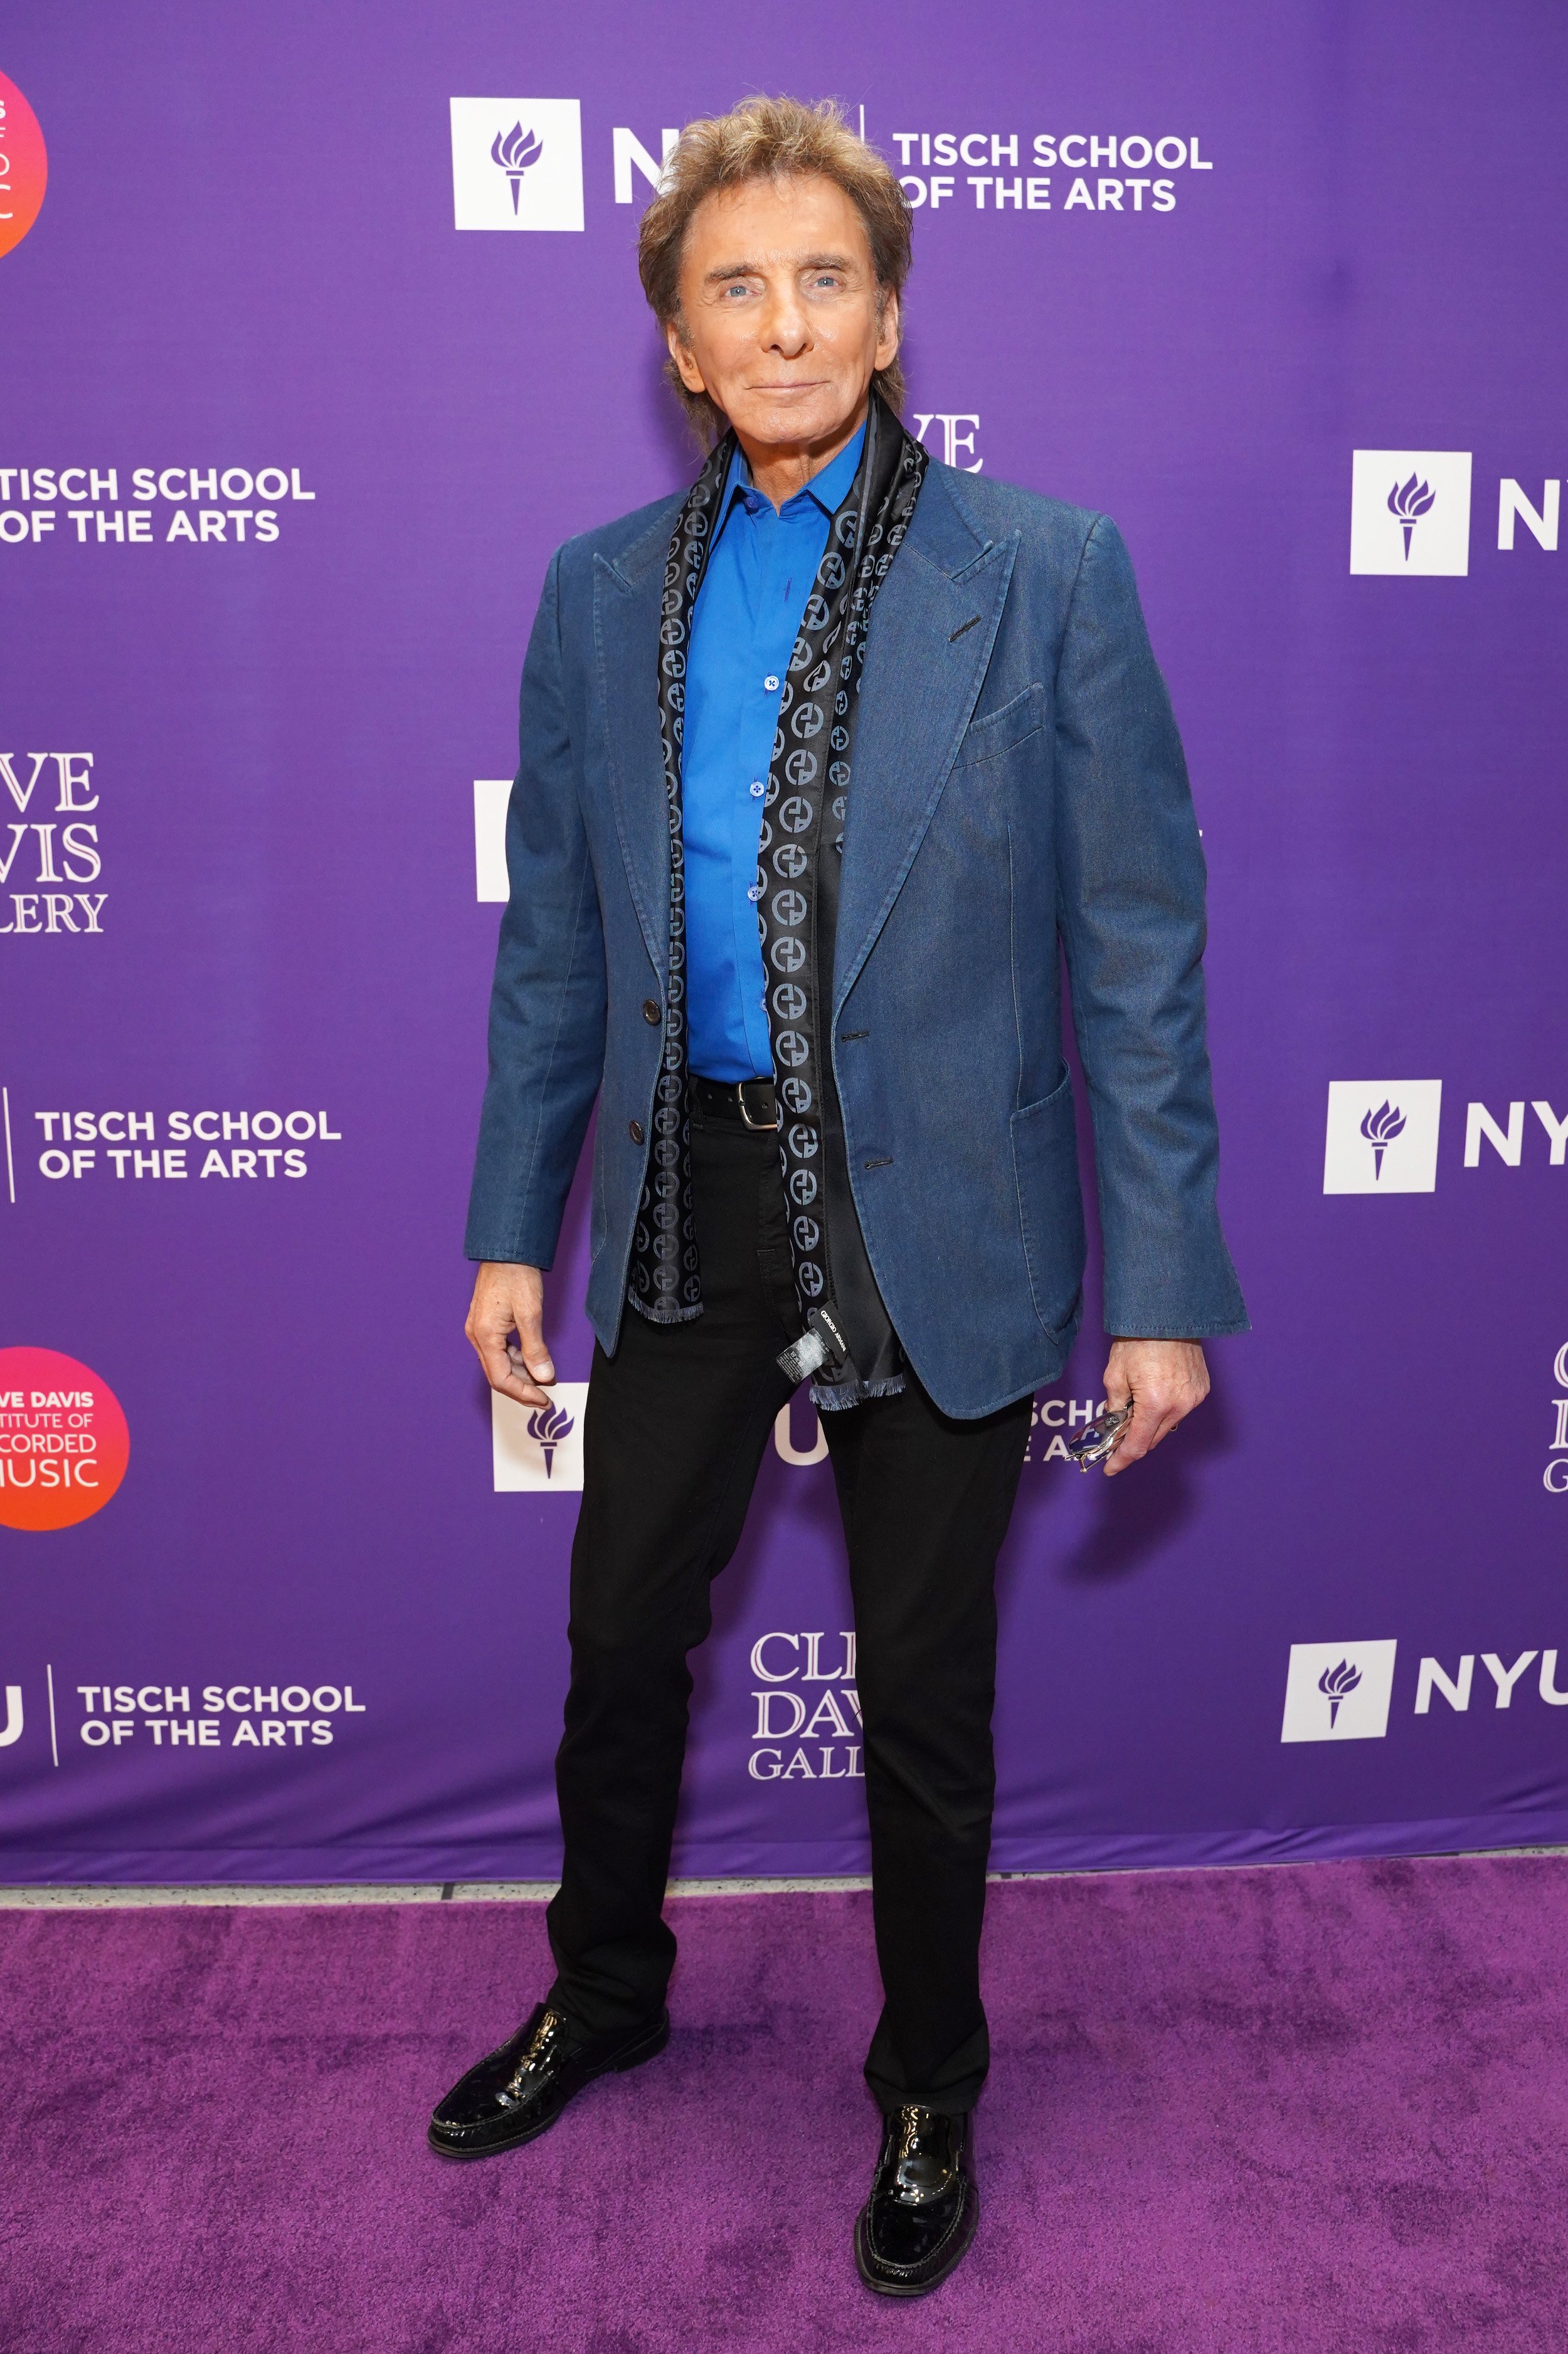 Barry Manilow attends as NYU Tisch School of the Arts opens the "Clive Davis Gallery at NYU" on April 5, 2022 in Brooklyn, New York | Source: Getty Images